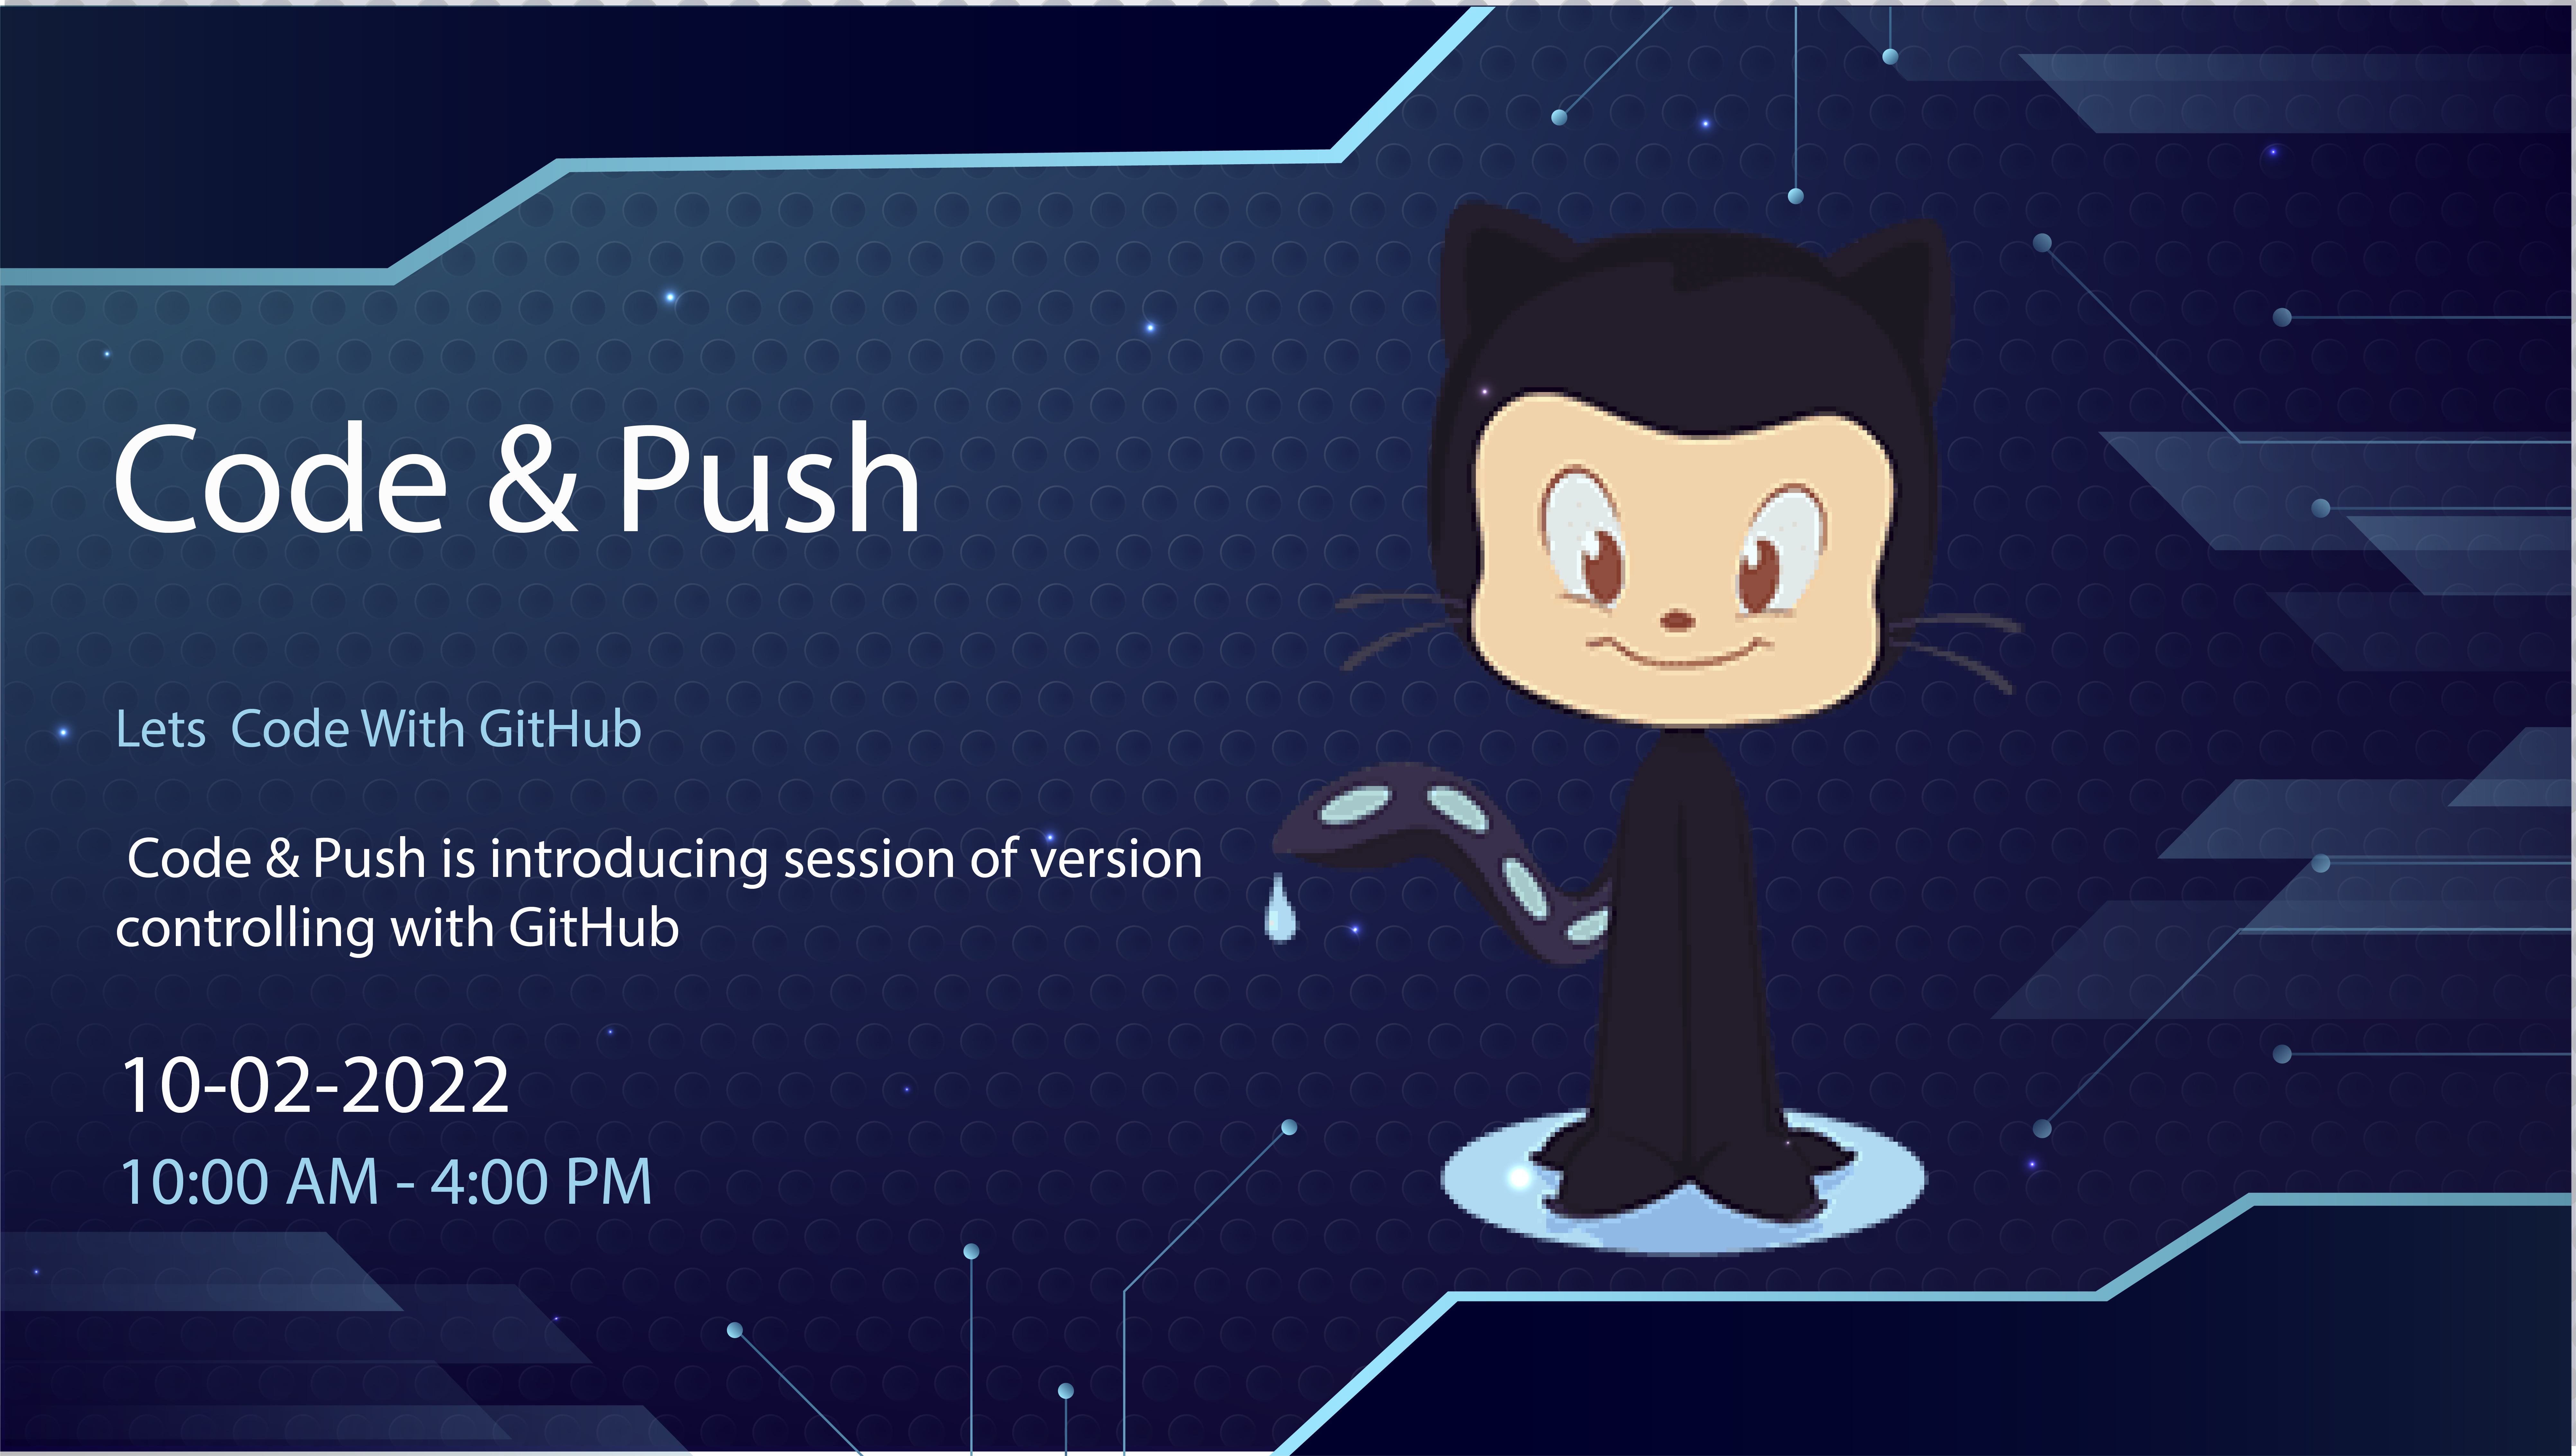 Code & Push is introducing session of version controlling with GitHub.